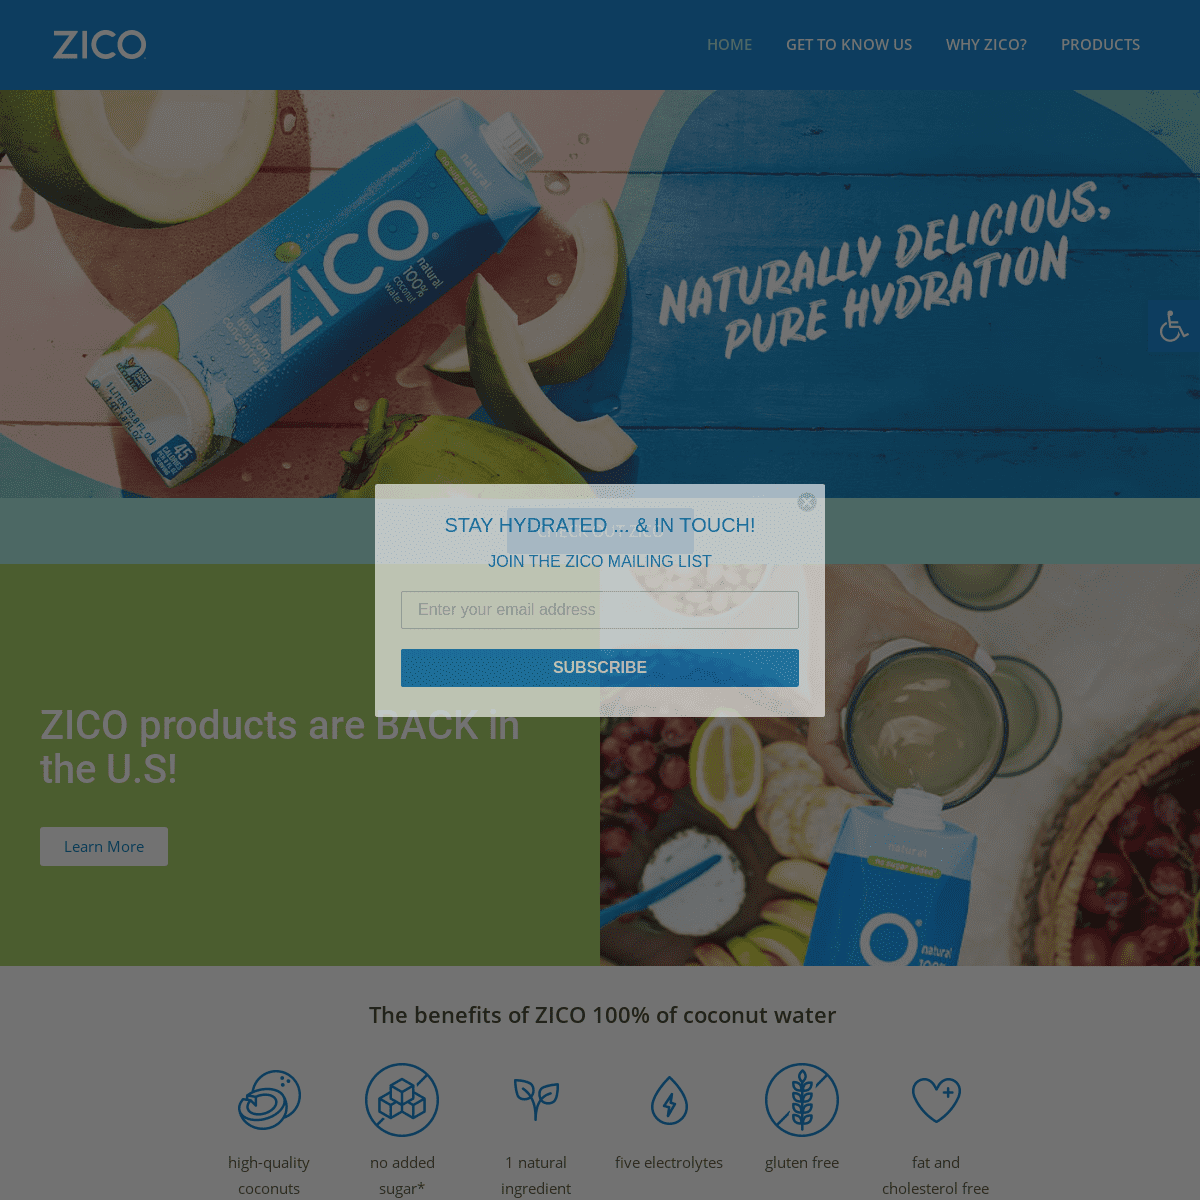 A complete backup of https://zico.com